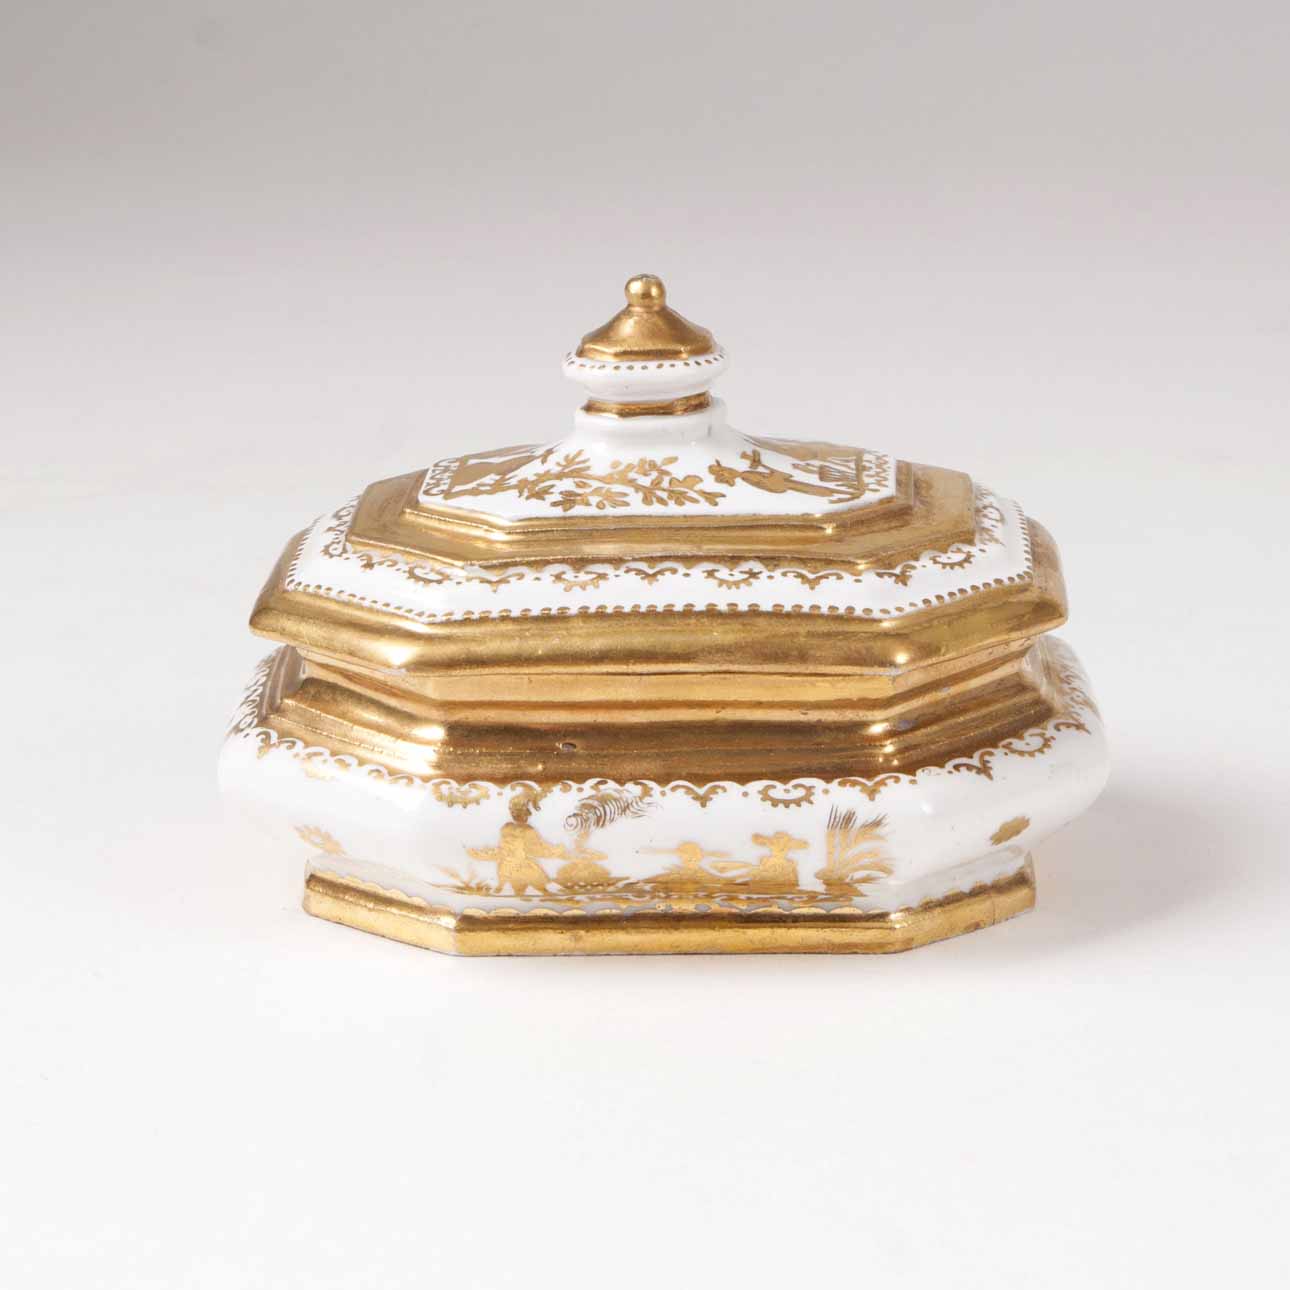 A rare Böttger sugar-box with gold chinoiseries from Augsburg - image 2